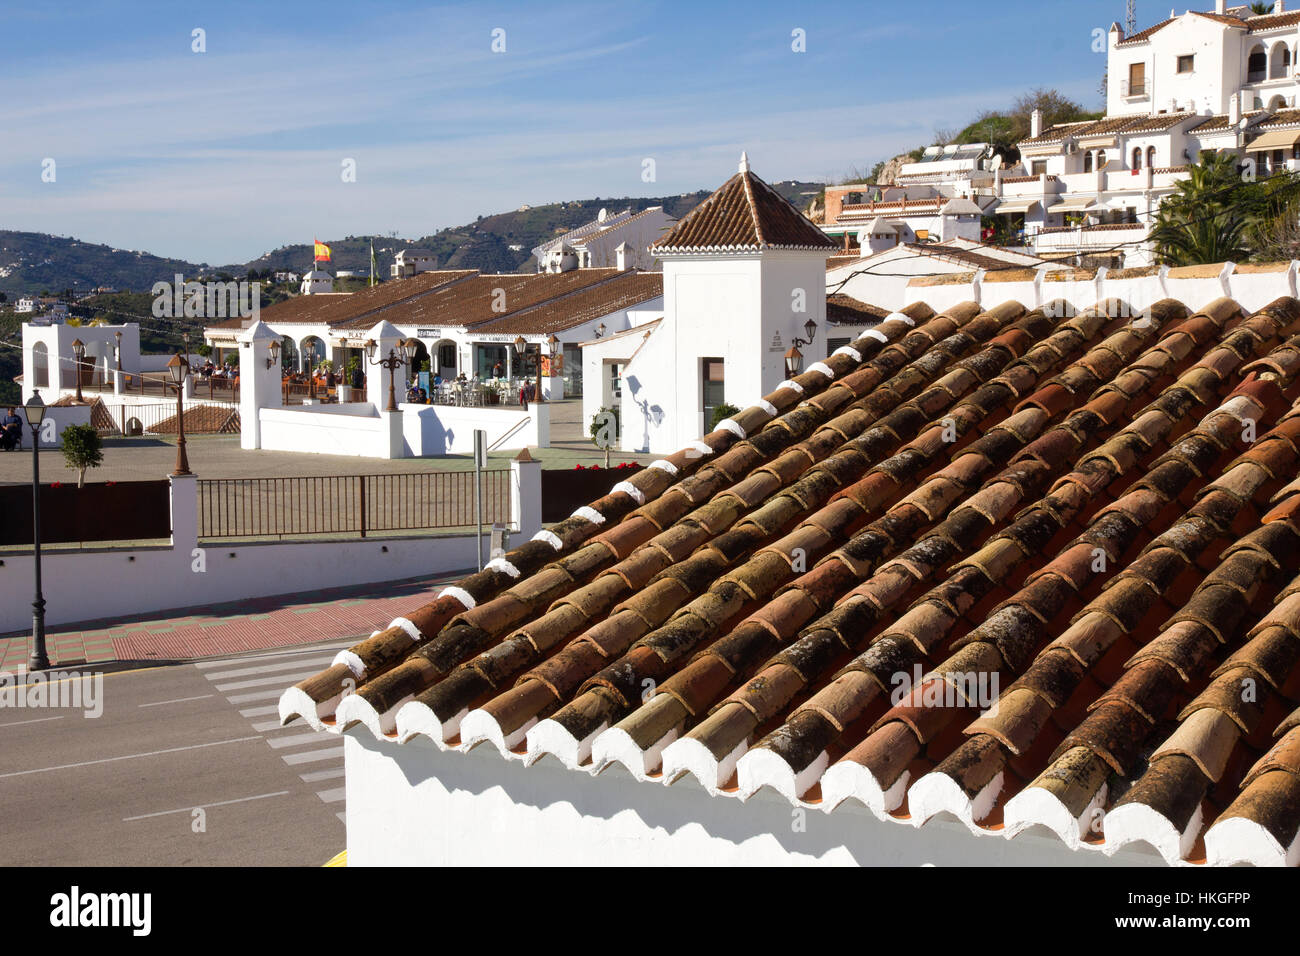 tiled roof tops on white washed buildings at Frigiliana, nr Malaga Spain. Stock Photo